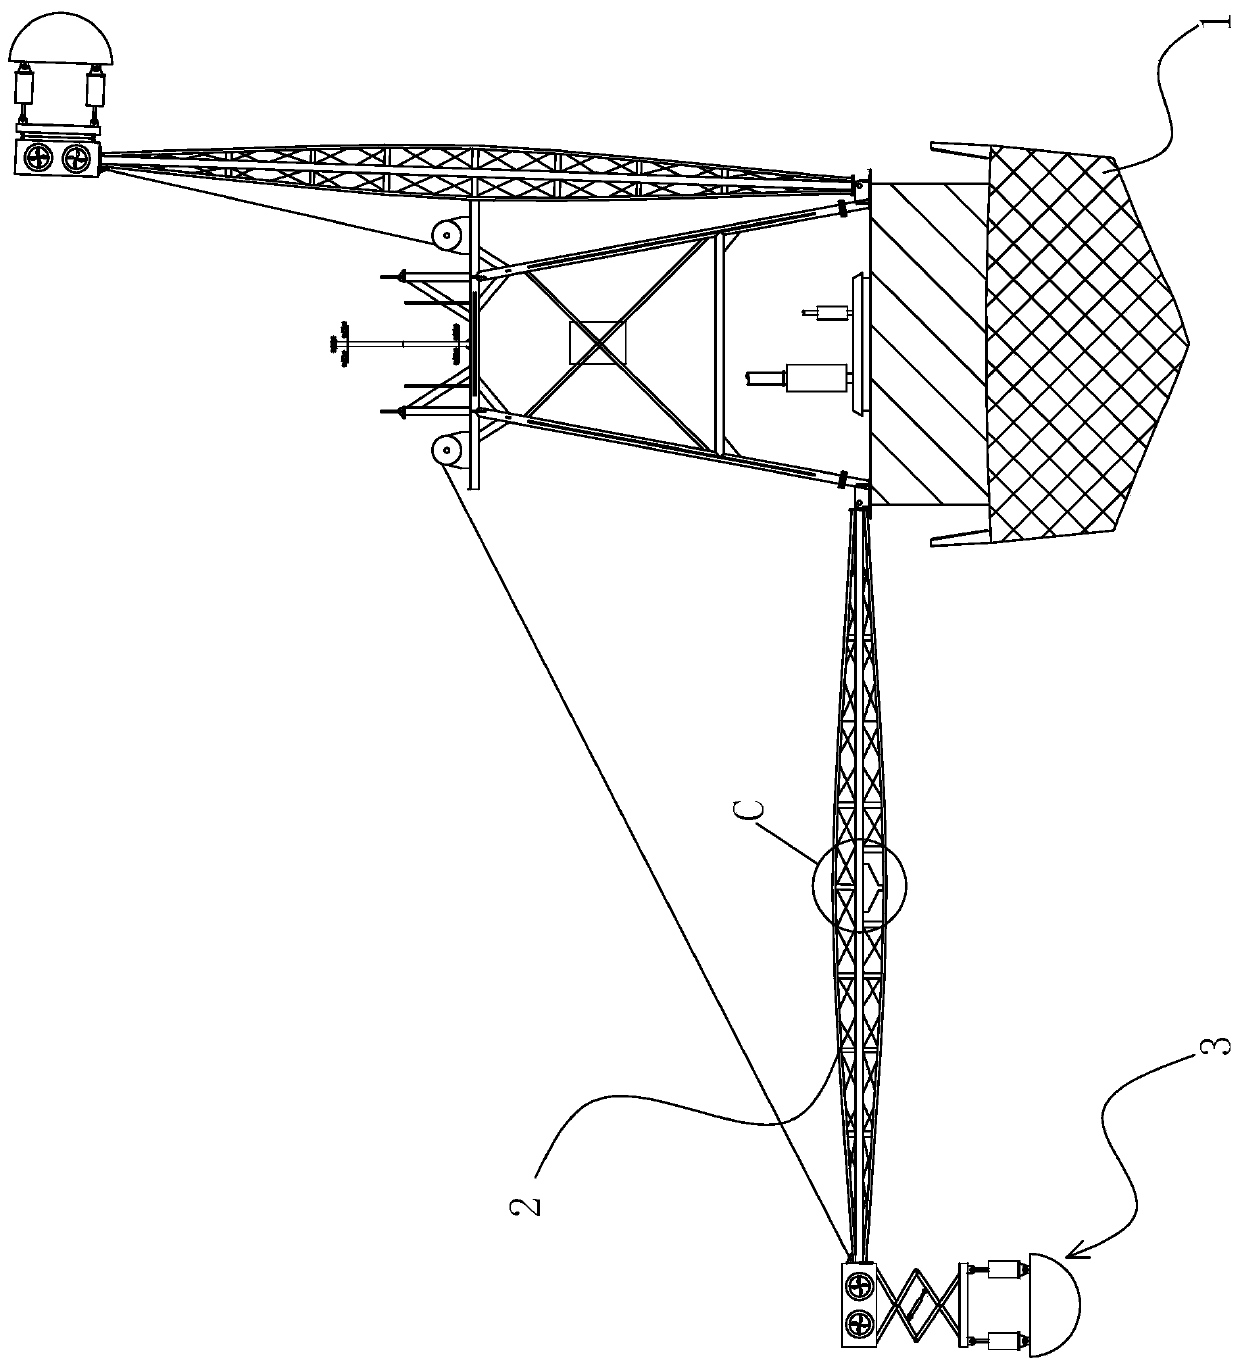 A support structure for a trawl jib